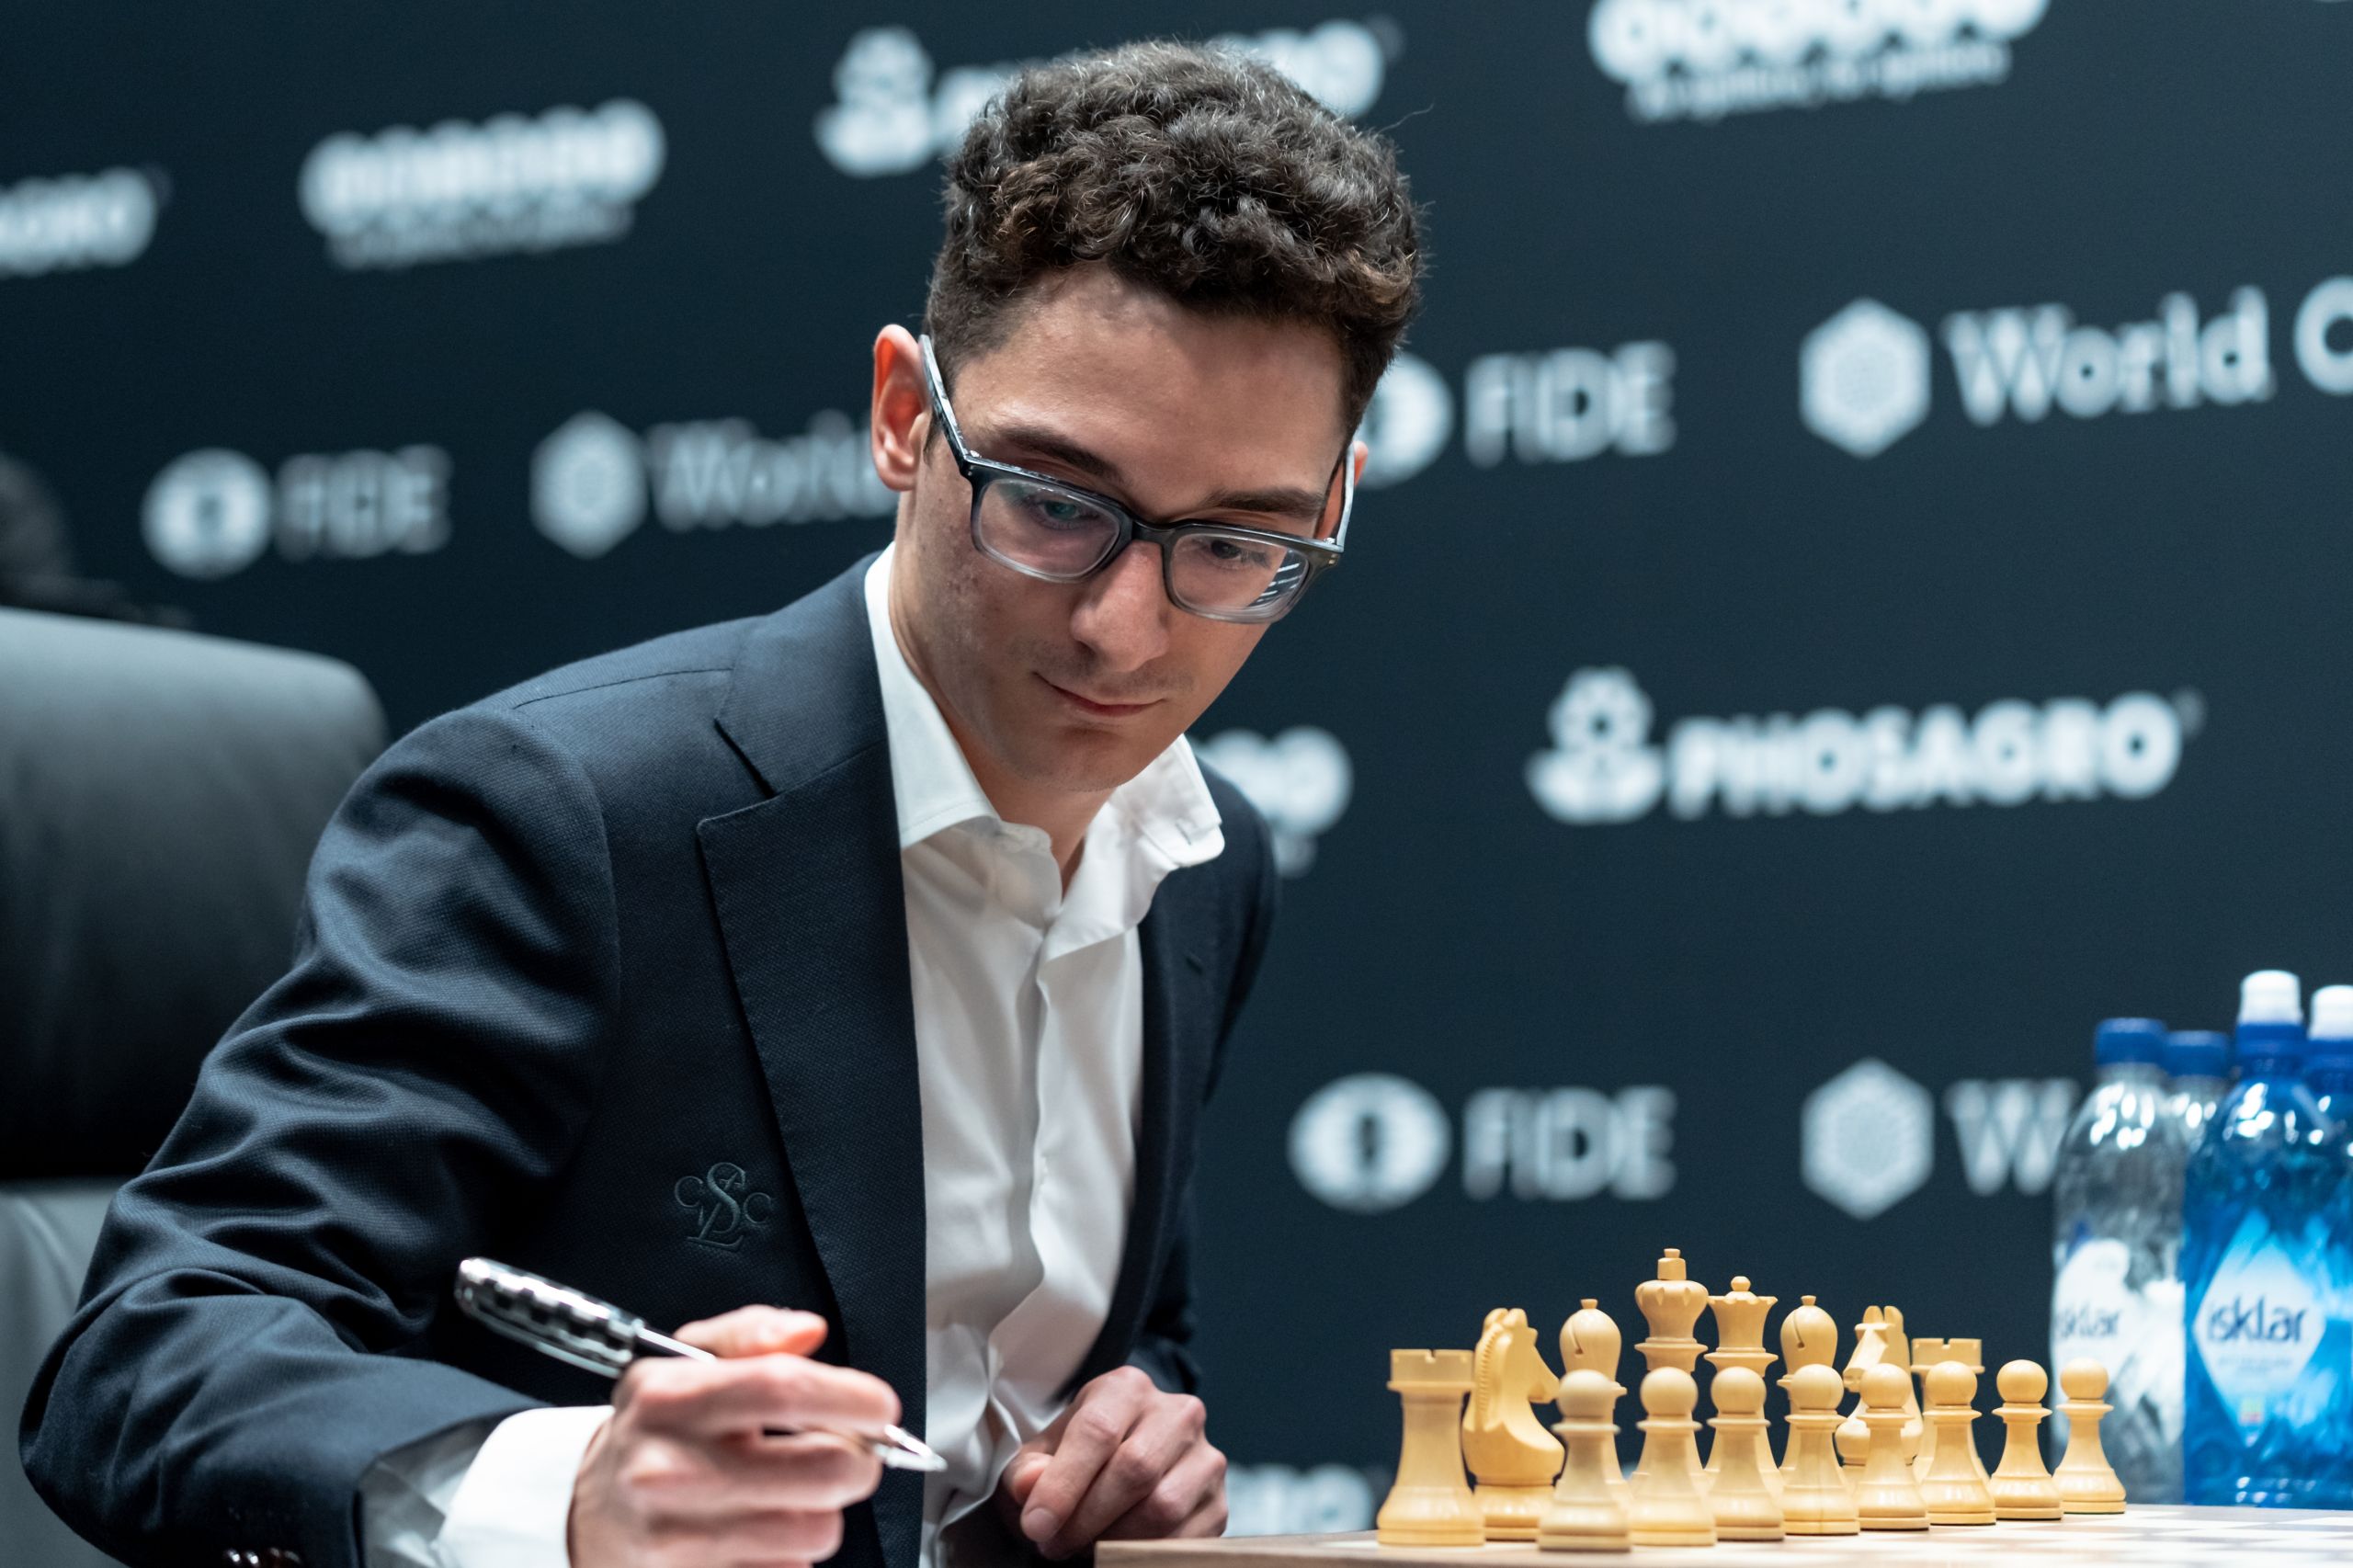 Firouzja defeats Fabiano Caruana. Claims it was an easy game! 🥶 #ches